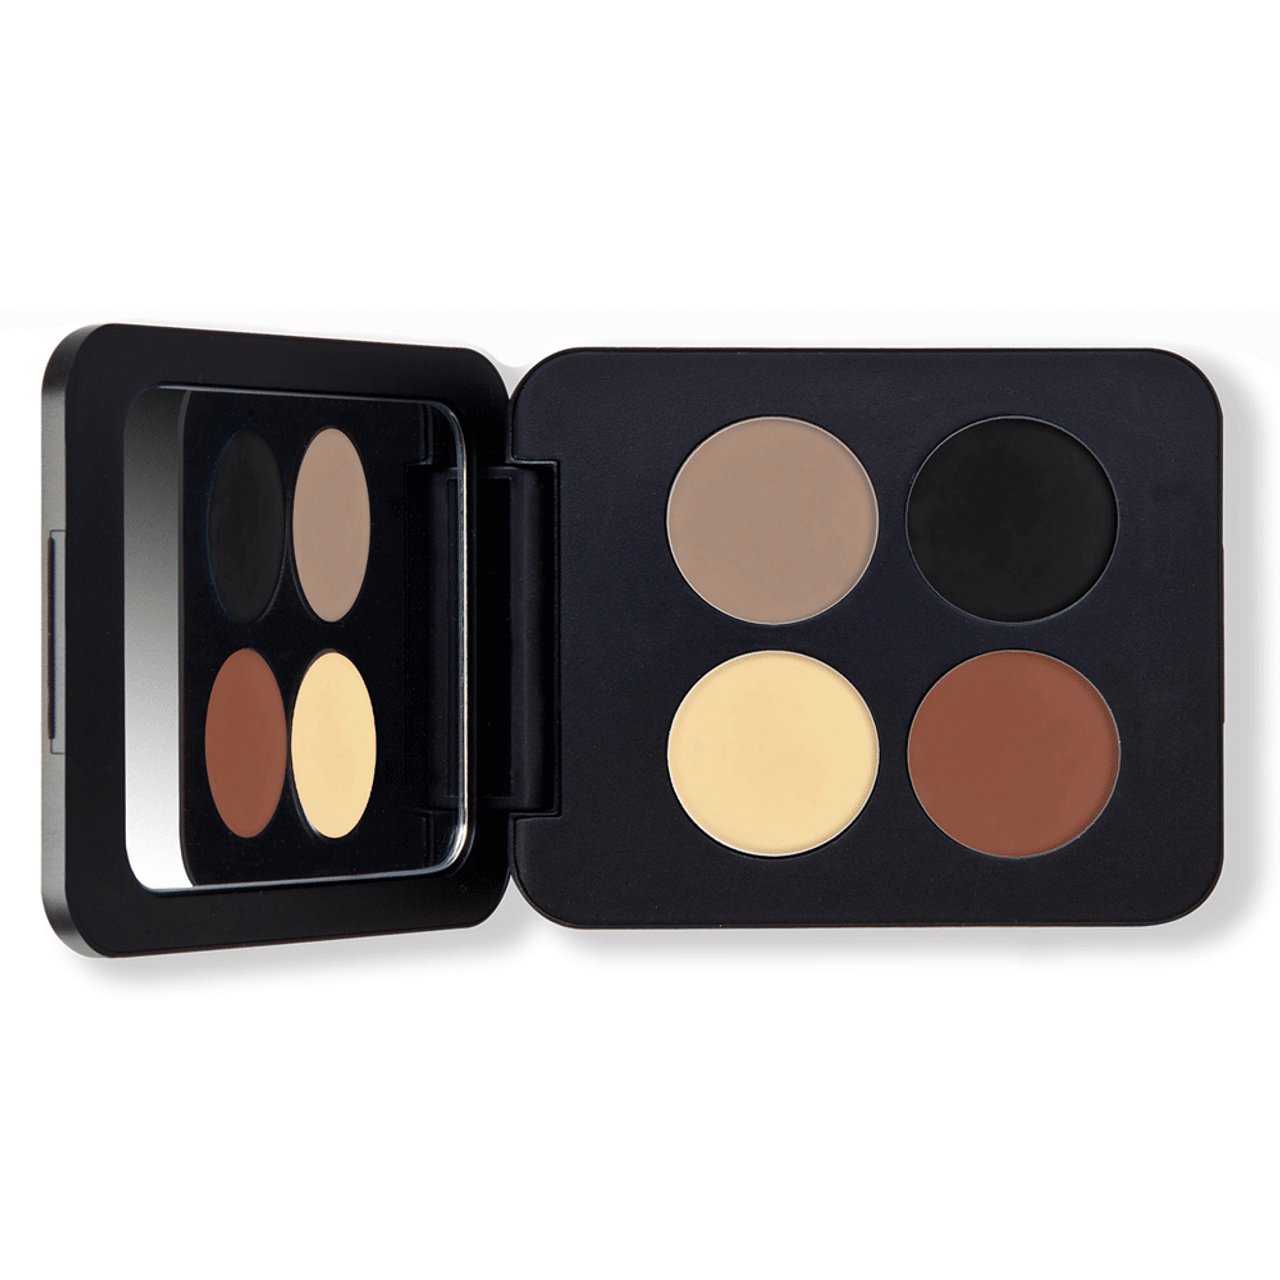 Youngblood Pressed Mineral Eyeshadow Quad- Desert Dreams BeautifiedYou.com